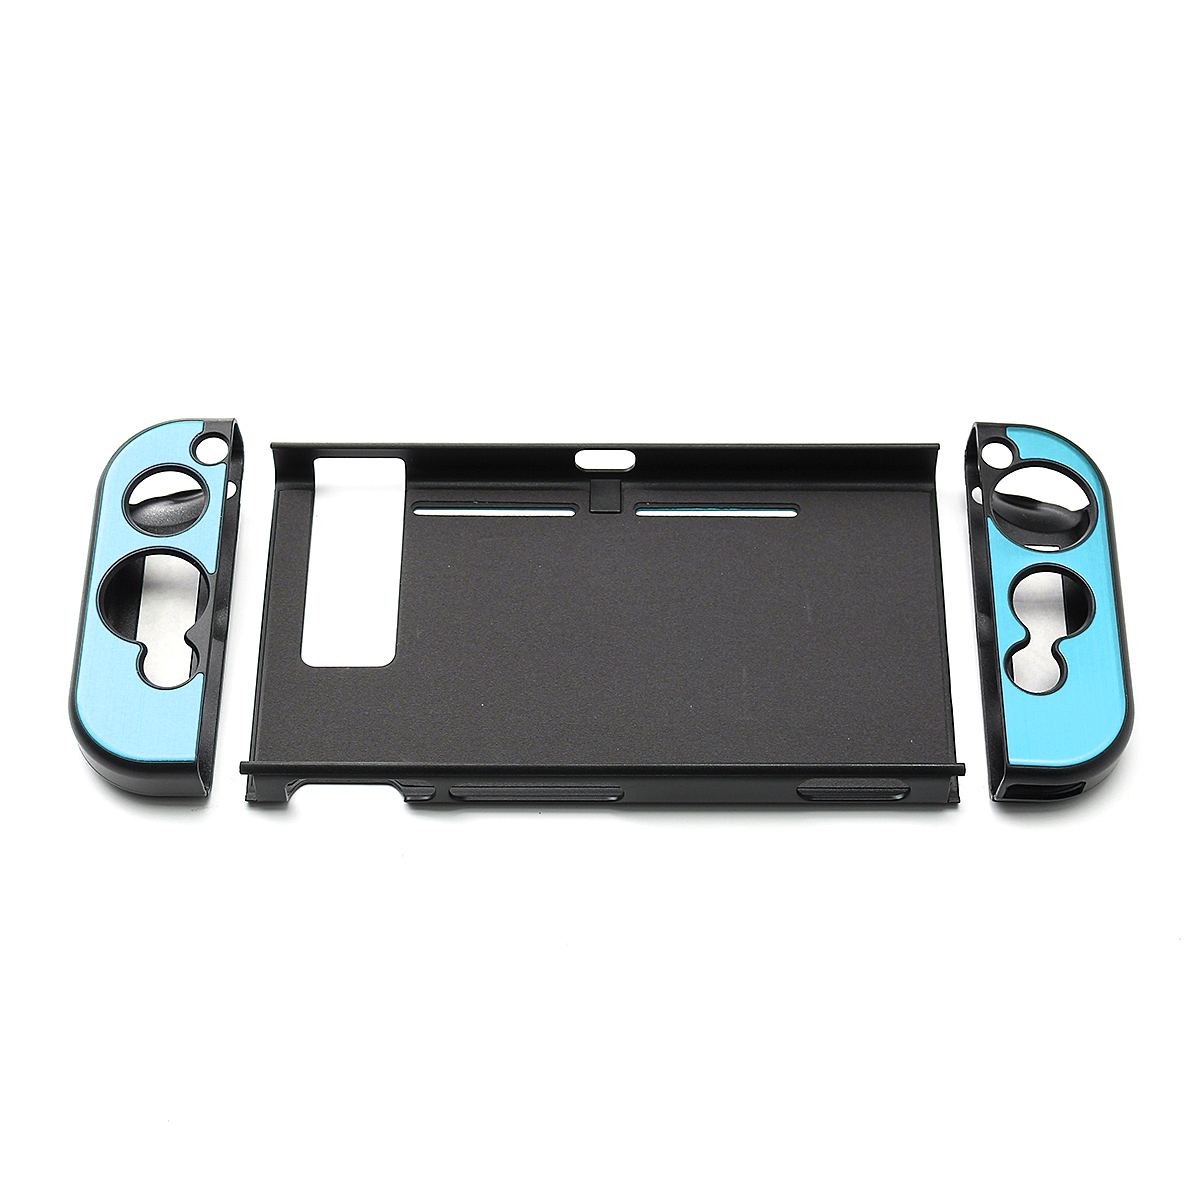 Anti-slip-Aluminum-Case-Cover-Skin-Shell-Protective-For-Nintendo-Switch-Game-Console-1431666-4